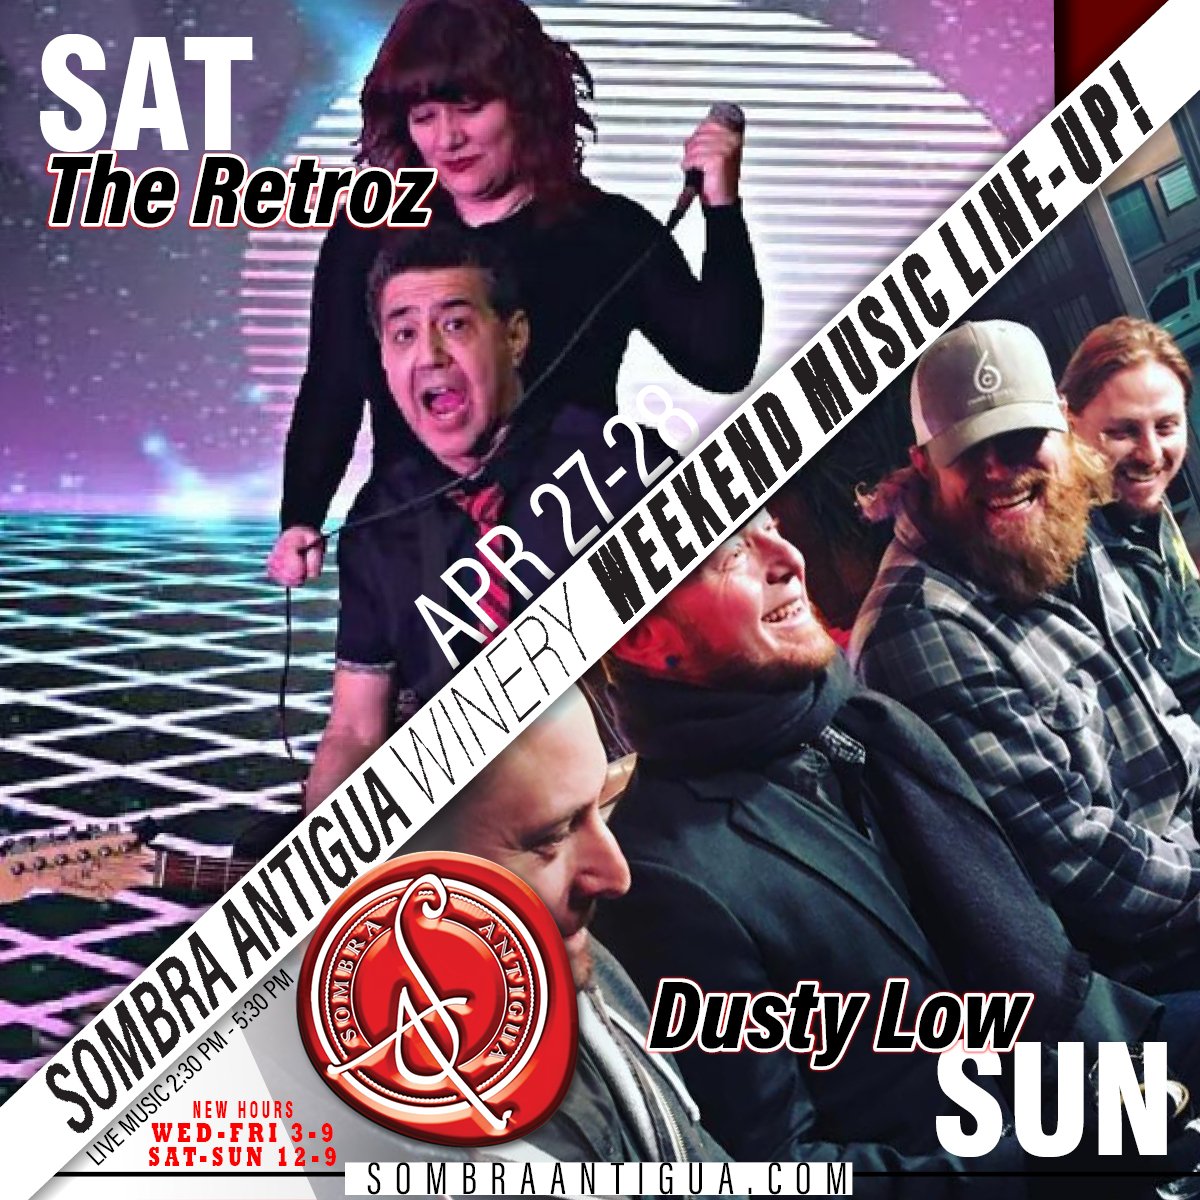 We're excited to tell you that The Retroz will be lighting up our stage this Saturday, followed by Dusty Low who will be creating a musical magic on Sunday! We hope to see you there for a weekend filled with great music!